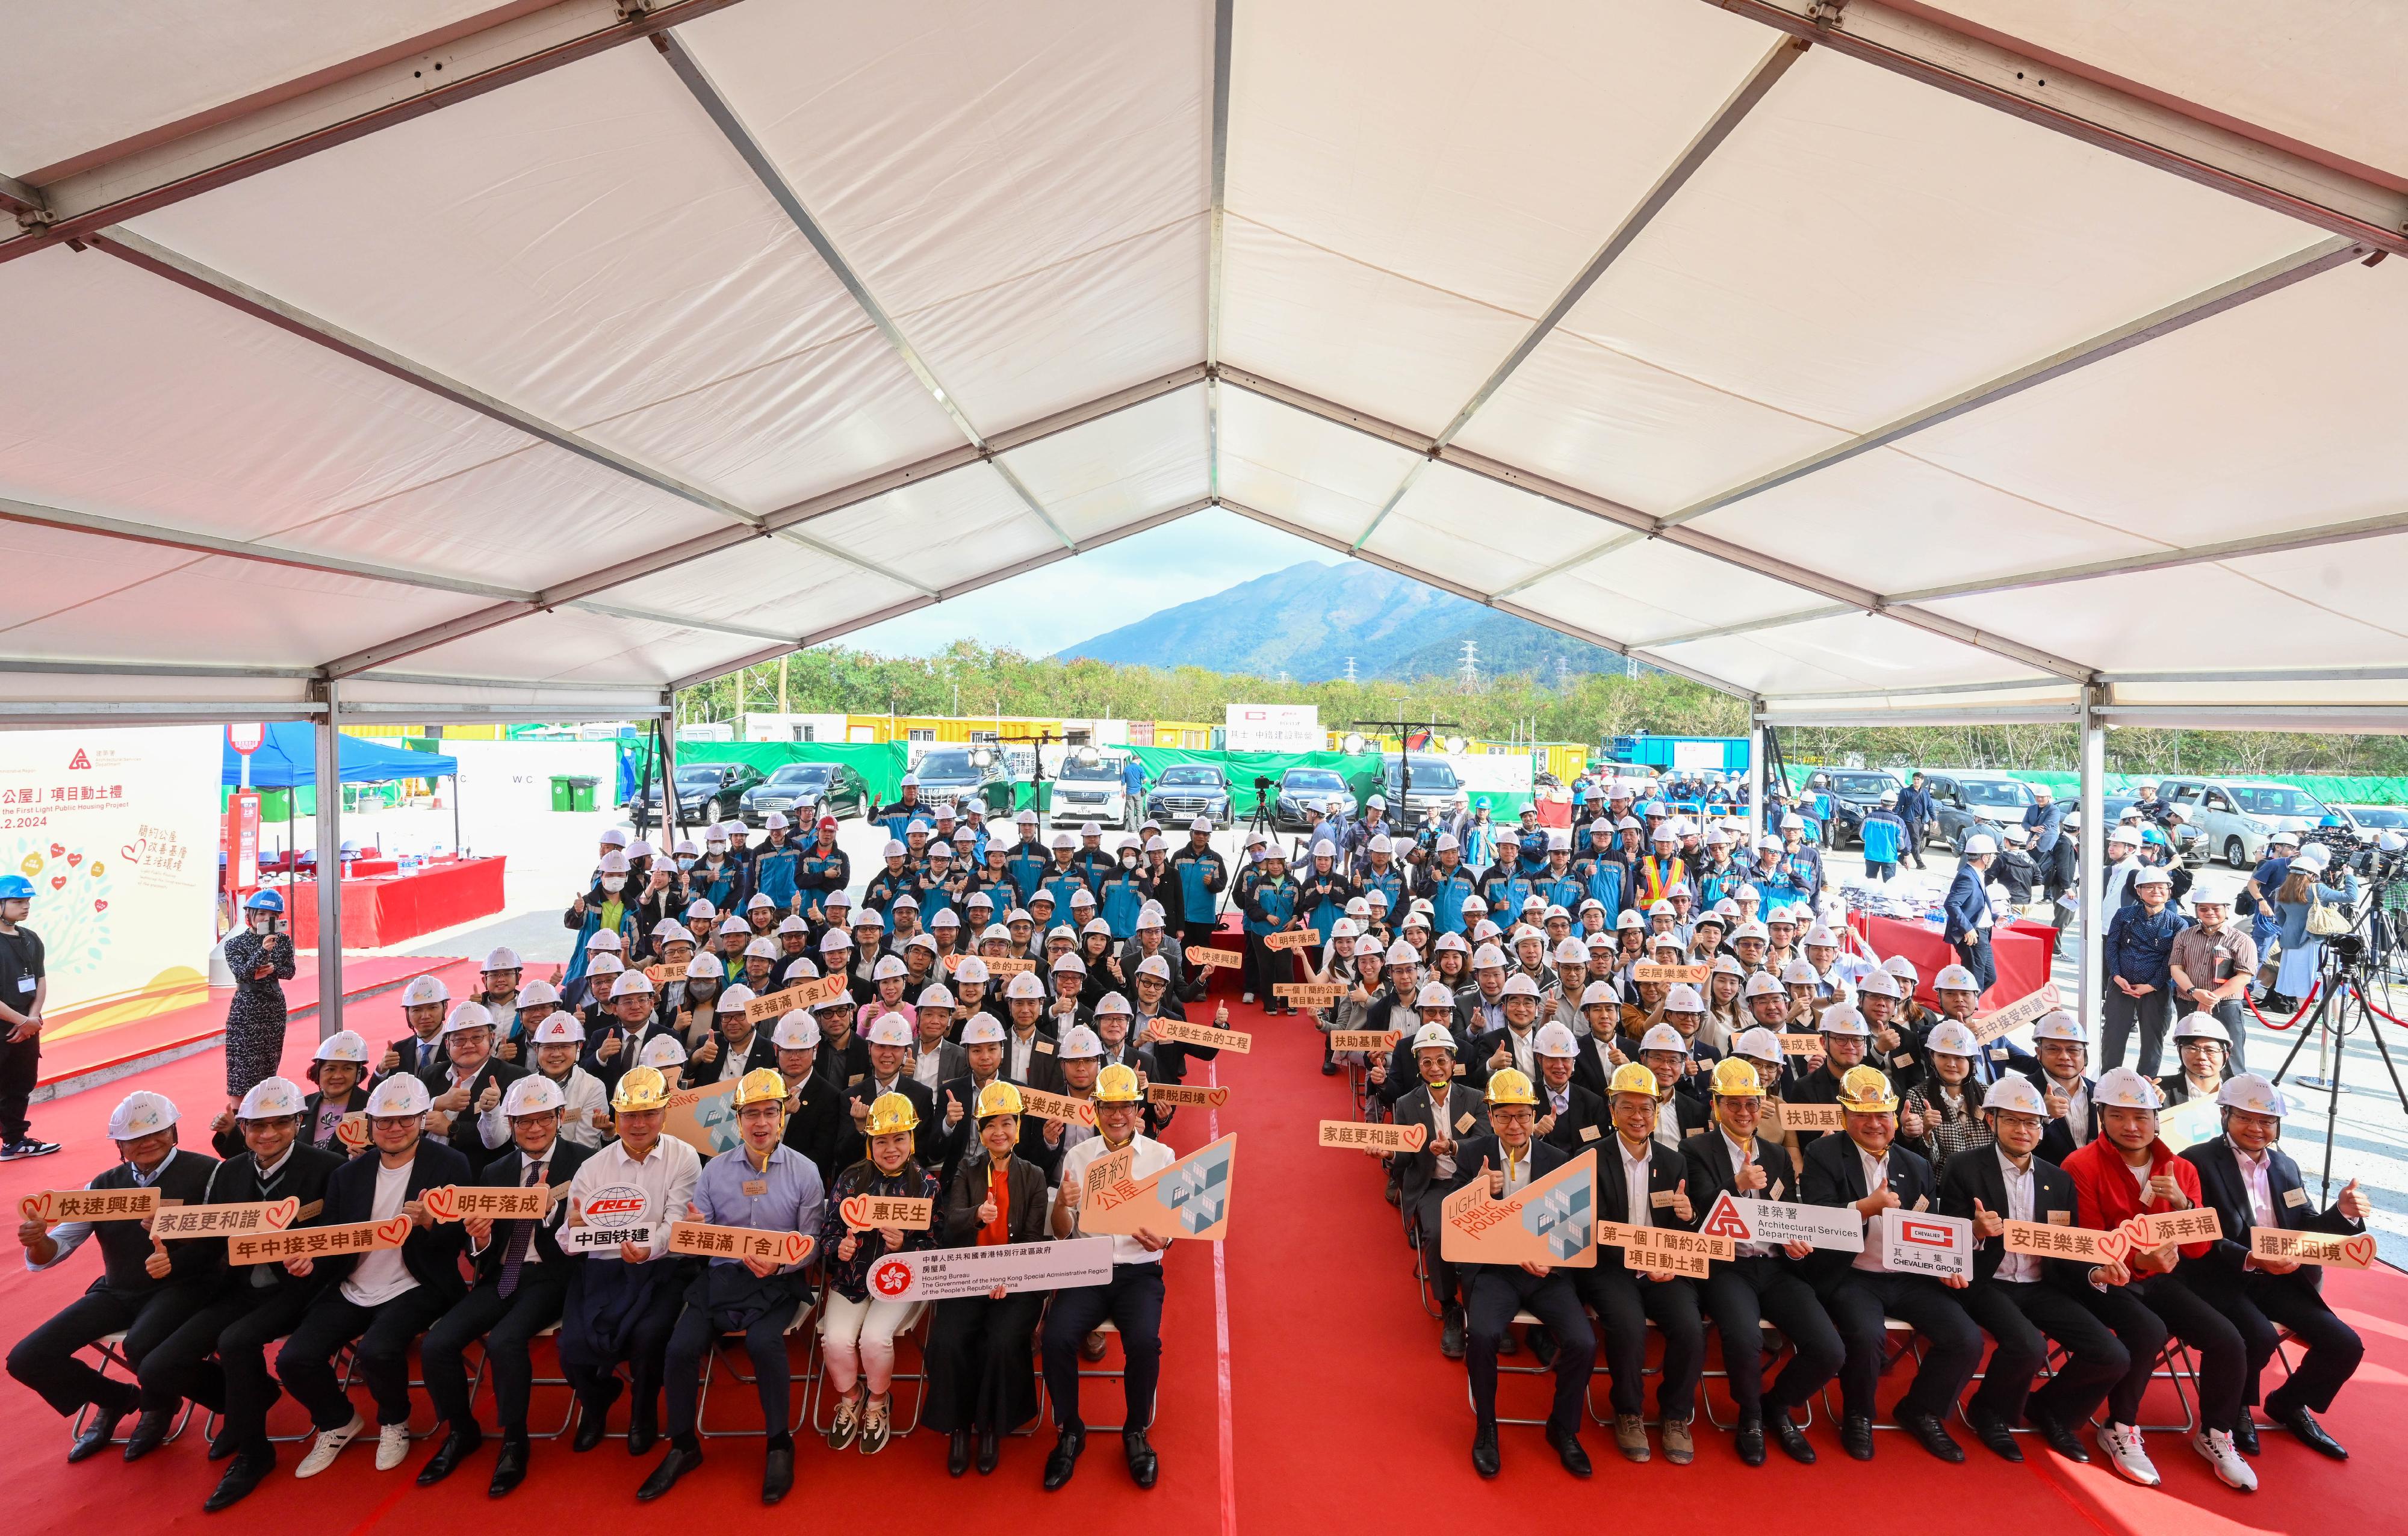 The groundbreaking ceremony for the first Light Public Housing project was held this afternoon (February 19) at the site at Yau Pok Road in Yuen Long, demonstrating the Government’s determination and ability to improve the housing situation in Hong Kong. Photo shows the Deputy Financial Secretary, Mr Michael Wong (first row, ninth left); the Secretary for Housing, Ms Winnie Ho (first row, eighth left); the Secretary for Labour and Welfare, Mr Chris Sun (first row, seventh right); the Permanent Secretary for Housing, Miss Rosanna Law (first row, seventh left); the Under Secretary for Housing, Mr Victor Tai (first row, sixth right); the Director of Architectural Services, Mr Michael Li (first row, fifth right); Executive Director of Sun Hung Kai Properties Mr Adam Kwok (first row, sixth left); the Chairman and Managing Director of the Chevalier Group, Mr Kuok Hoi-sang (first row, fourth right); the Chairman of the China Railway Construction Group Company Limited, Mr Mei Hongliang (first row, fifth left), and attending guests at the groundbreaking ceremony.